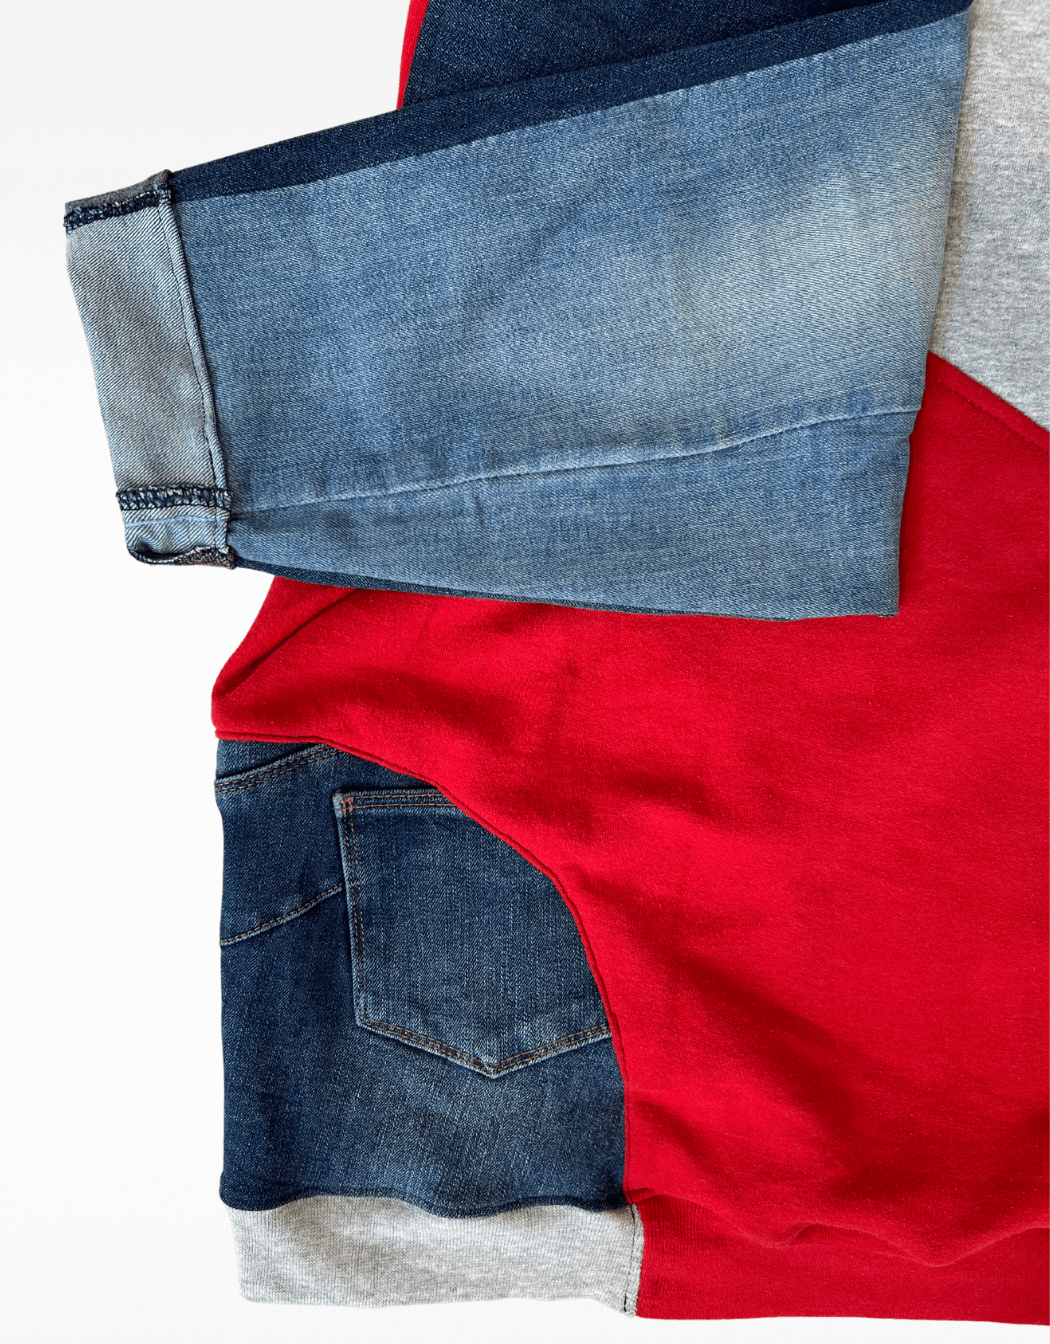 sweat-rework-jeans-upcycling-starter-2ndechance-dos-details